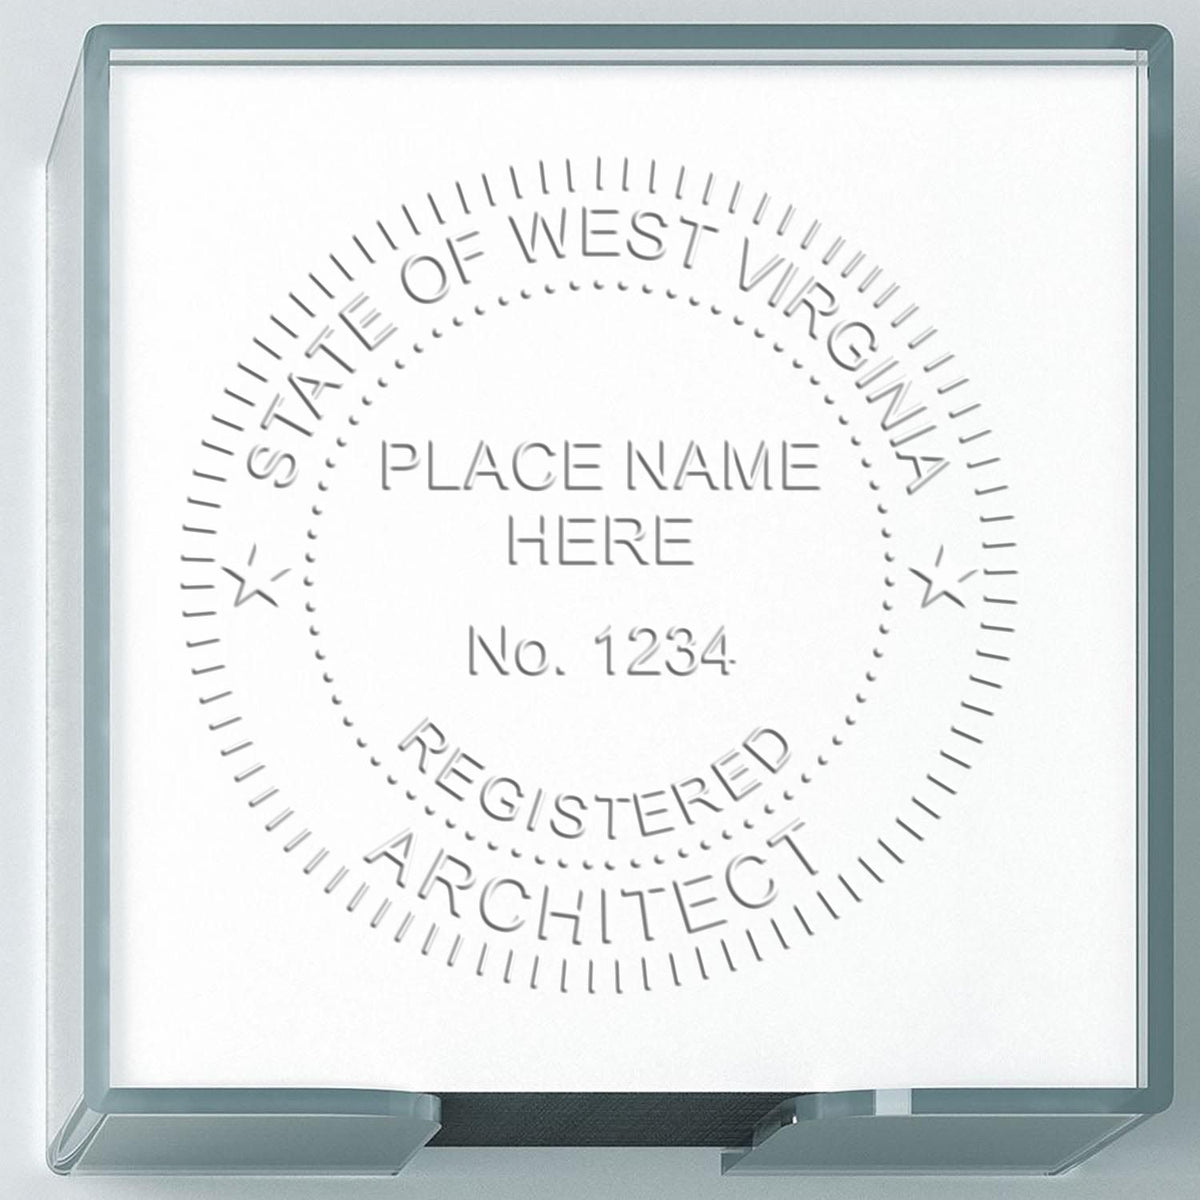 A photograph of the Hybrid West Virginia Architect Seal stamp impression reveals a vivid, professional image of the on paper.